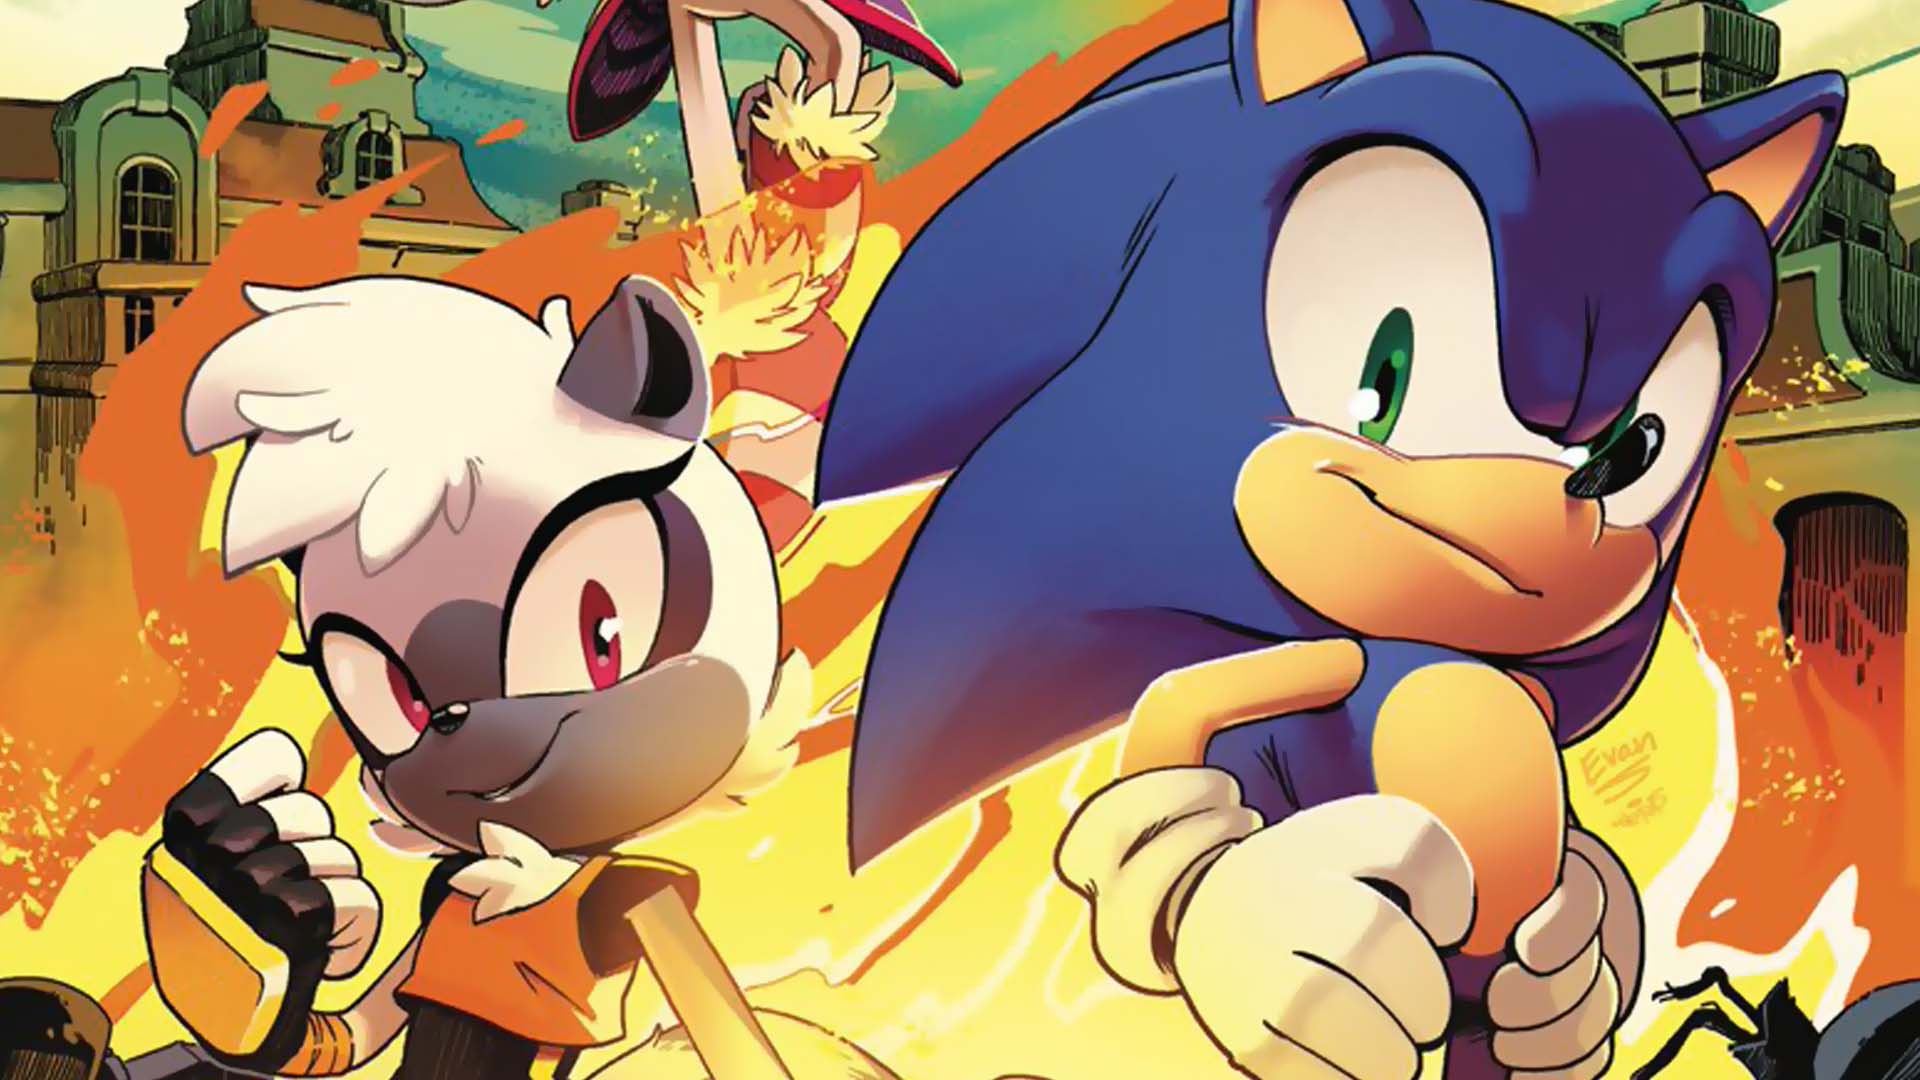 New art and character revealed for Sonic the Hedgehog comics